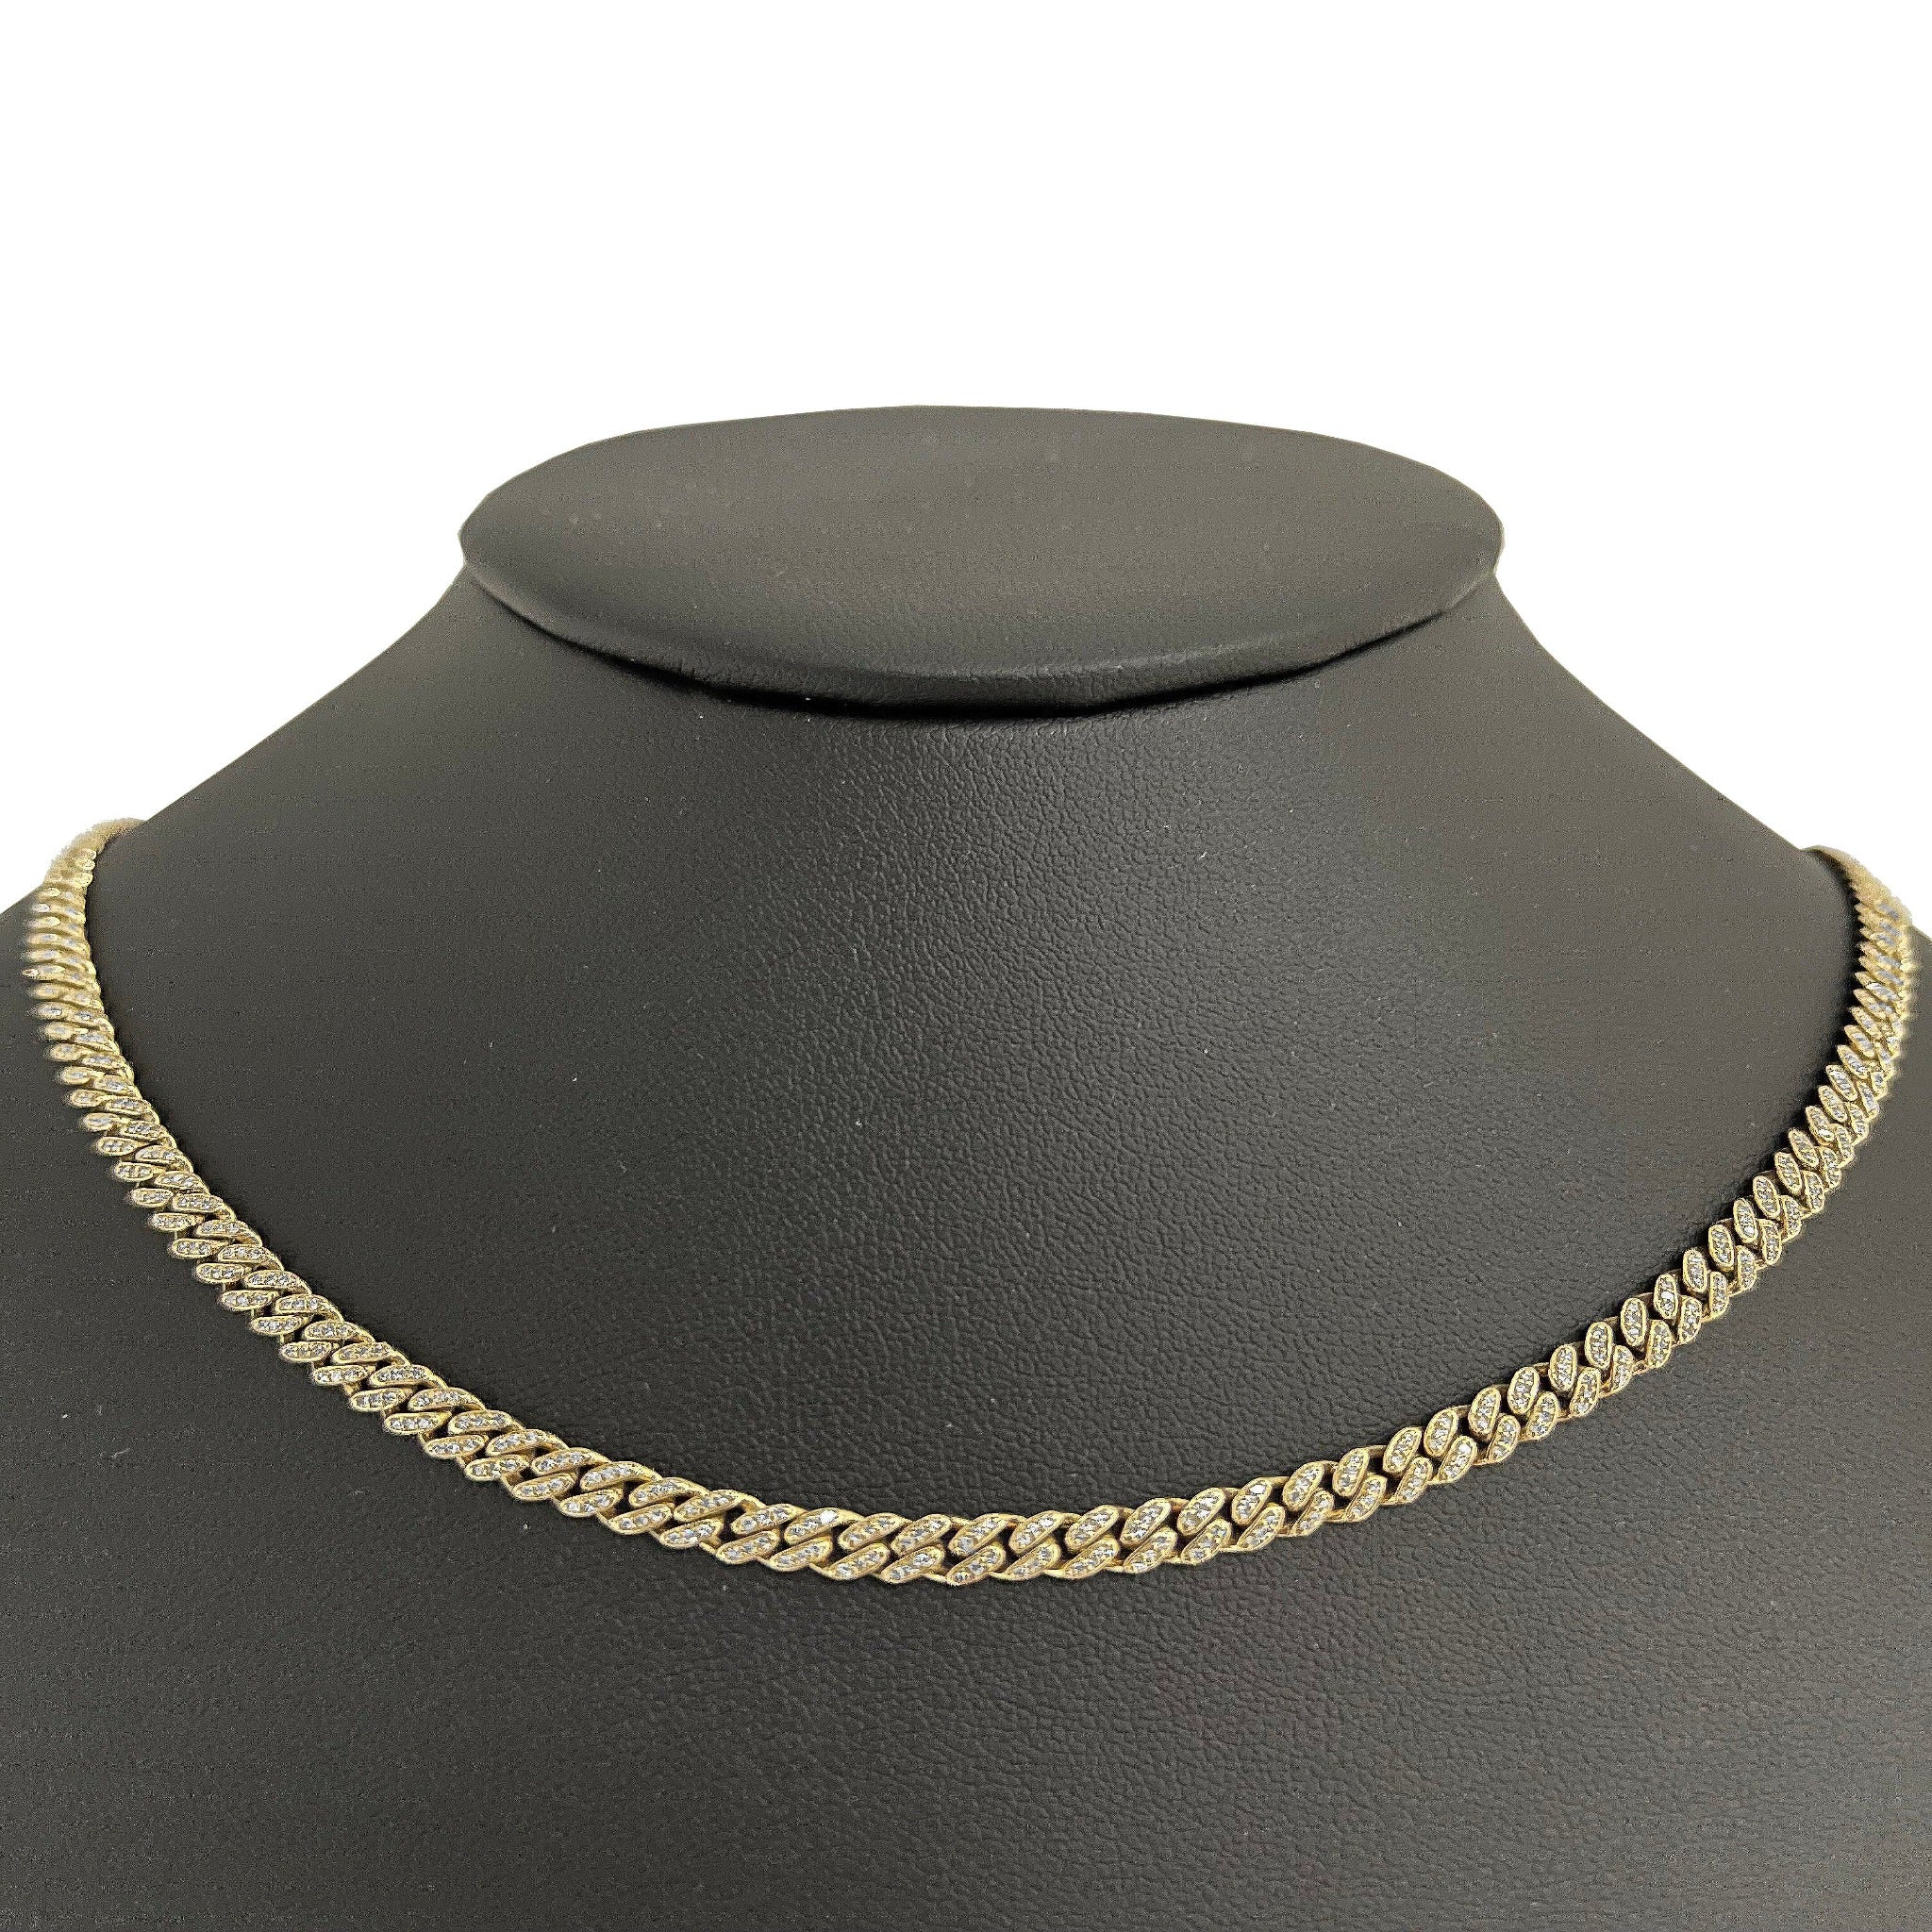 ''SPECIAL! 4mm 1.78ct 14k Yellow GOLD Diamond Round Cuban Necklace 18''''''